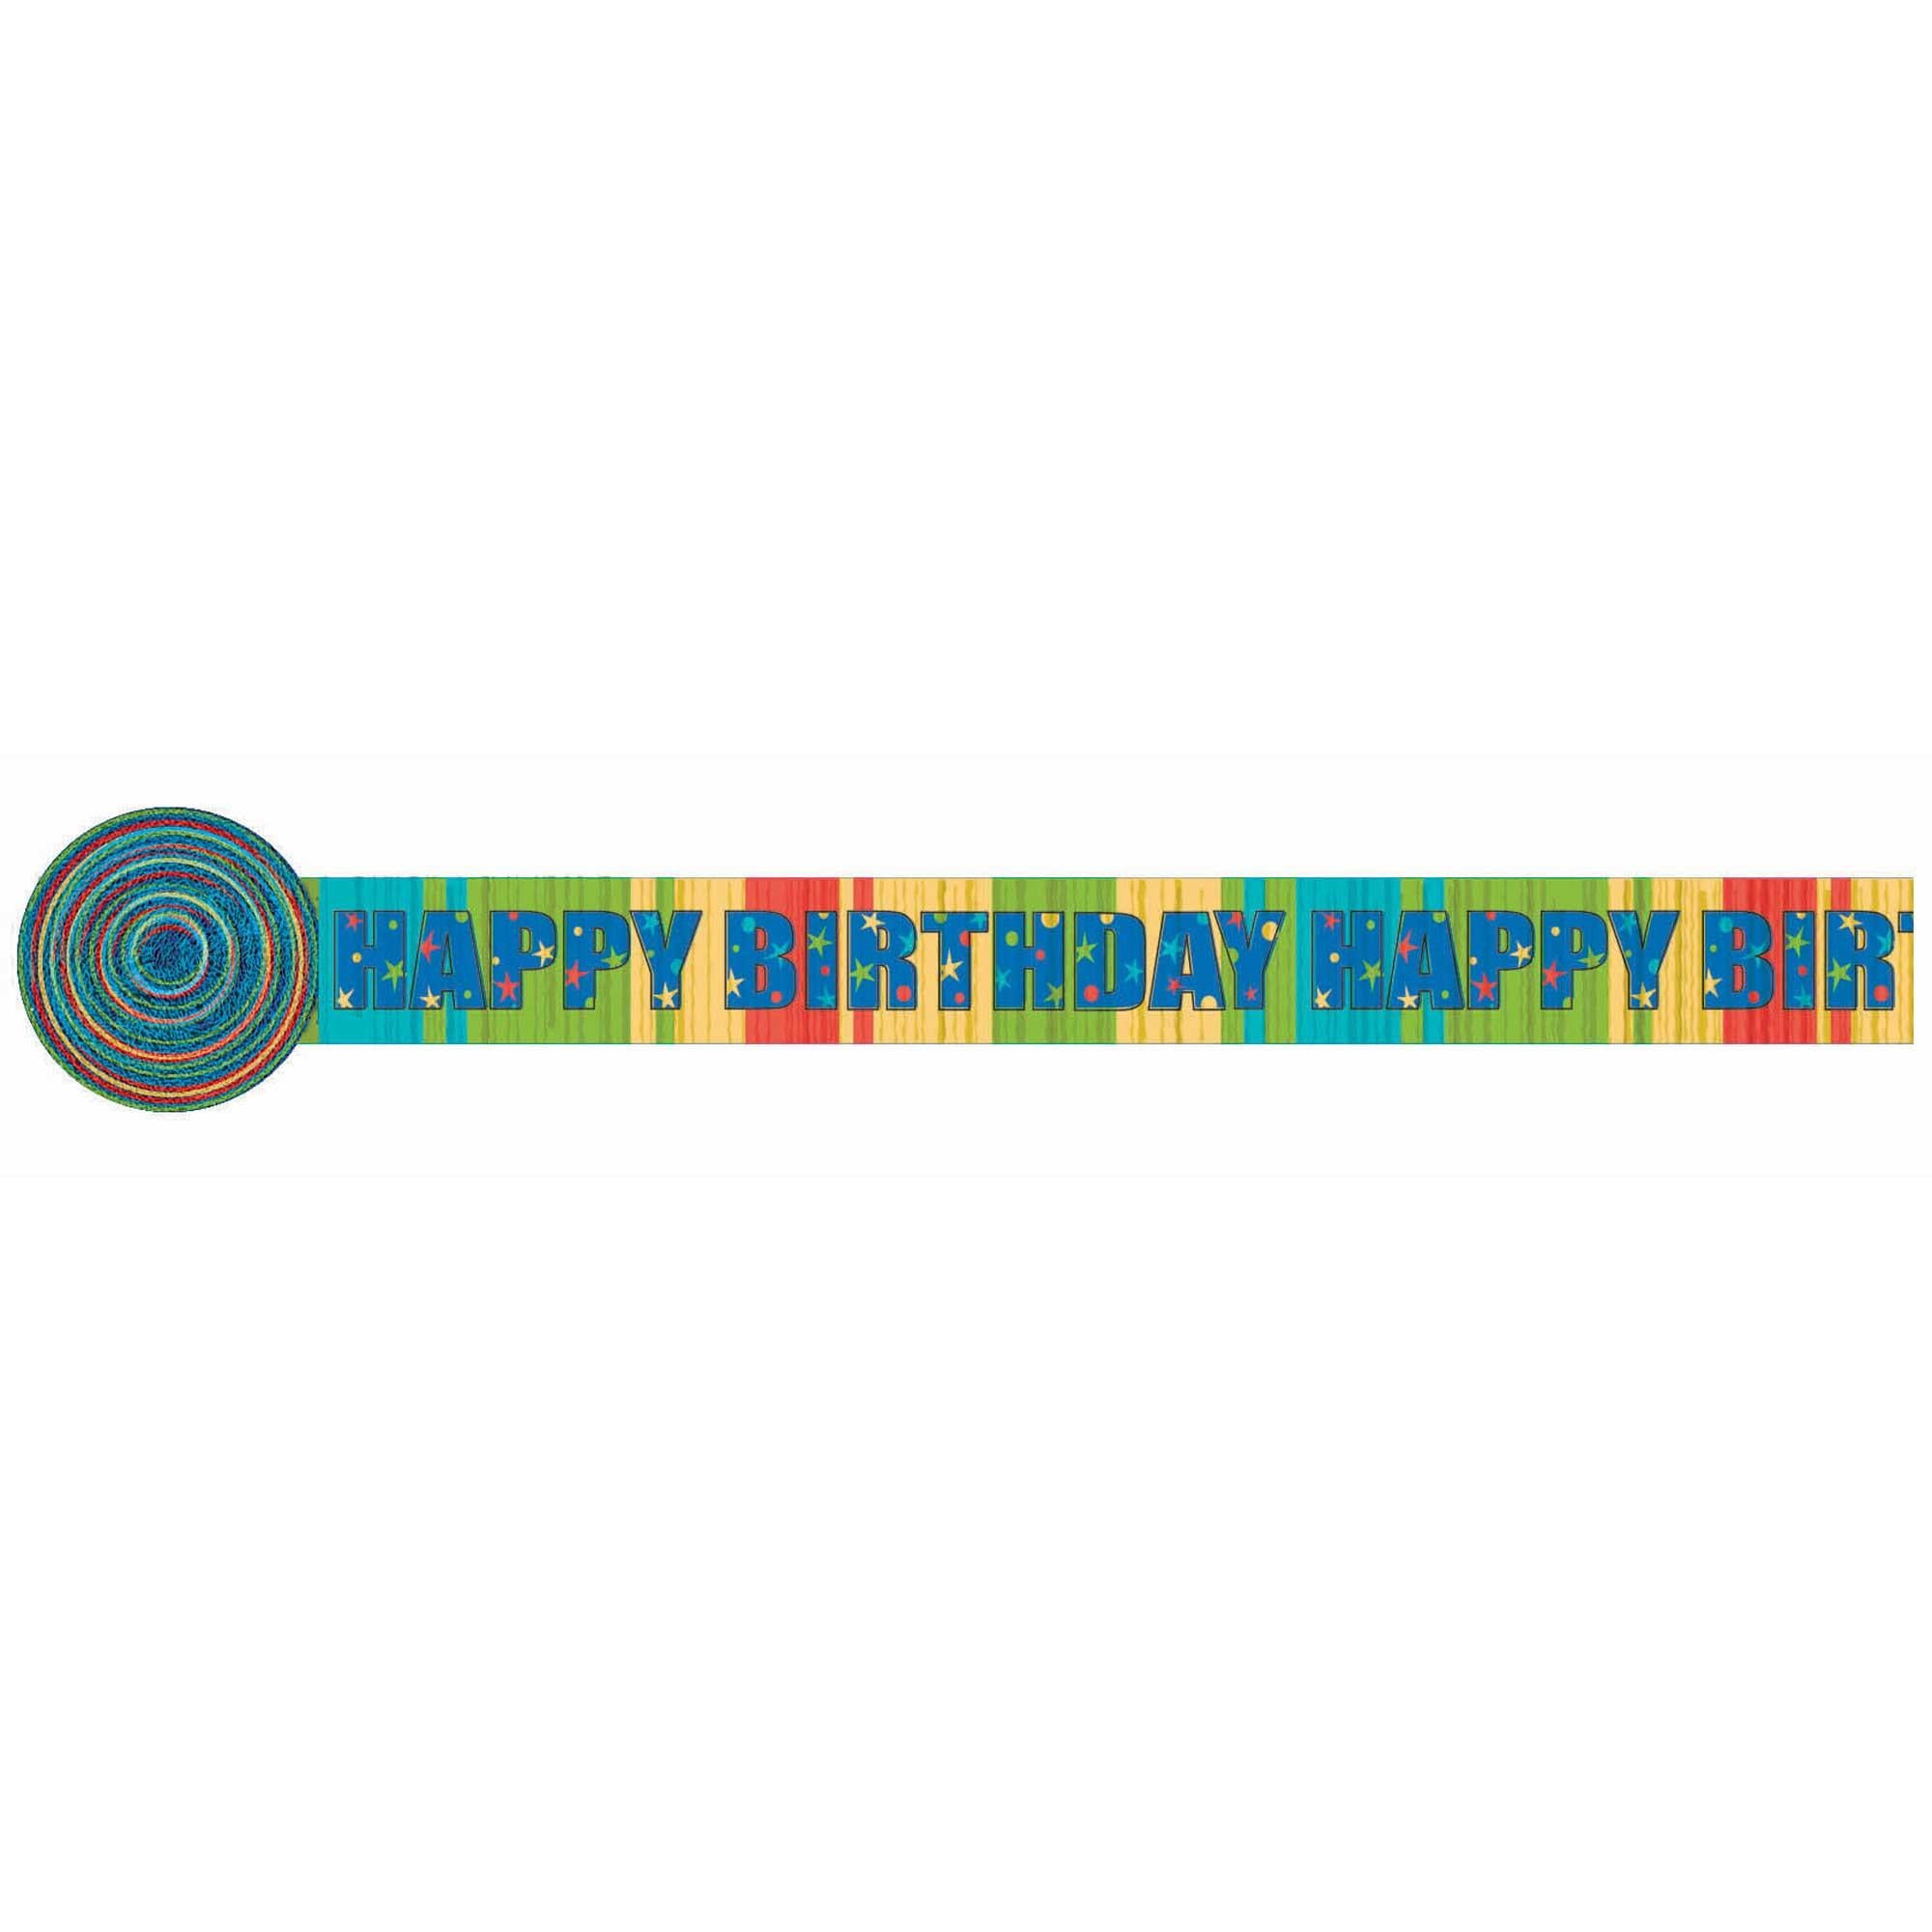 A Year To Celebrate Happy Birthday Crepe Streamer 30ft Decorations - Party Centre